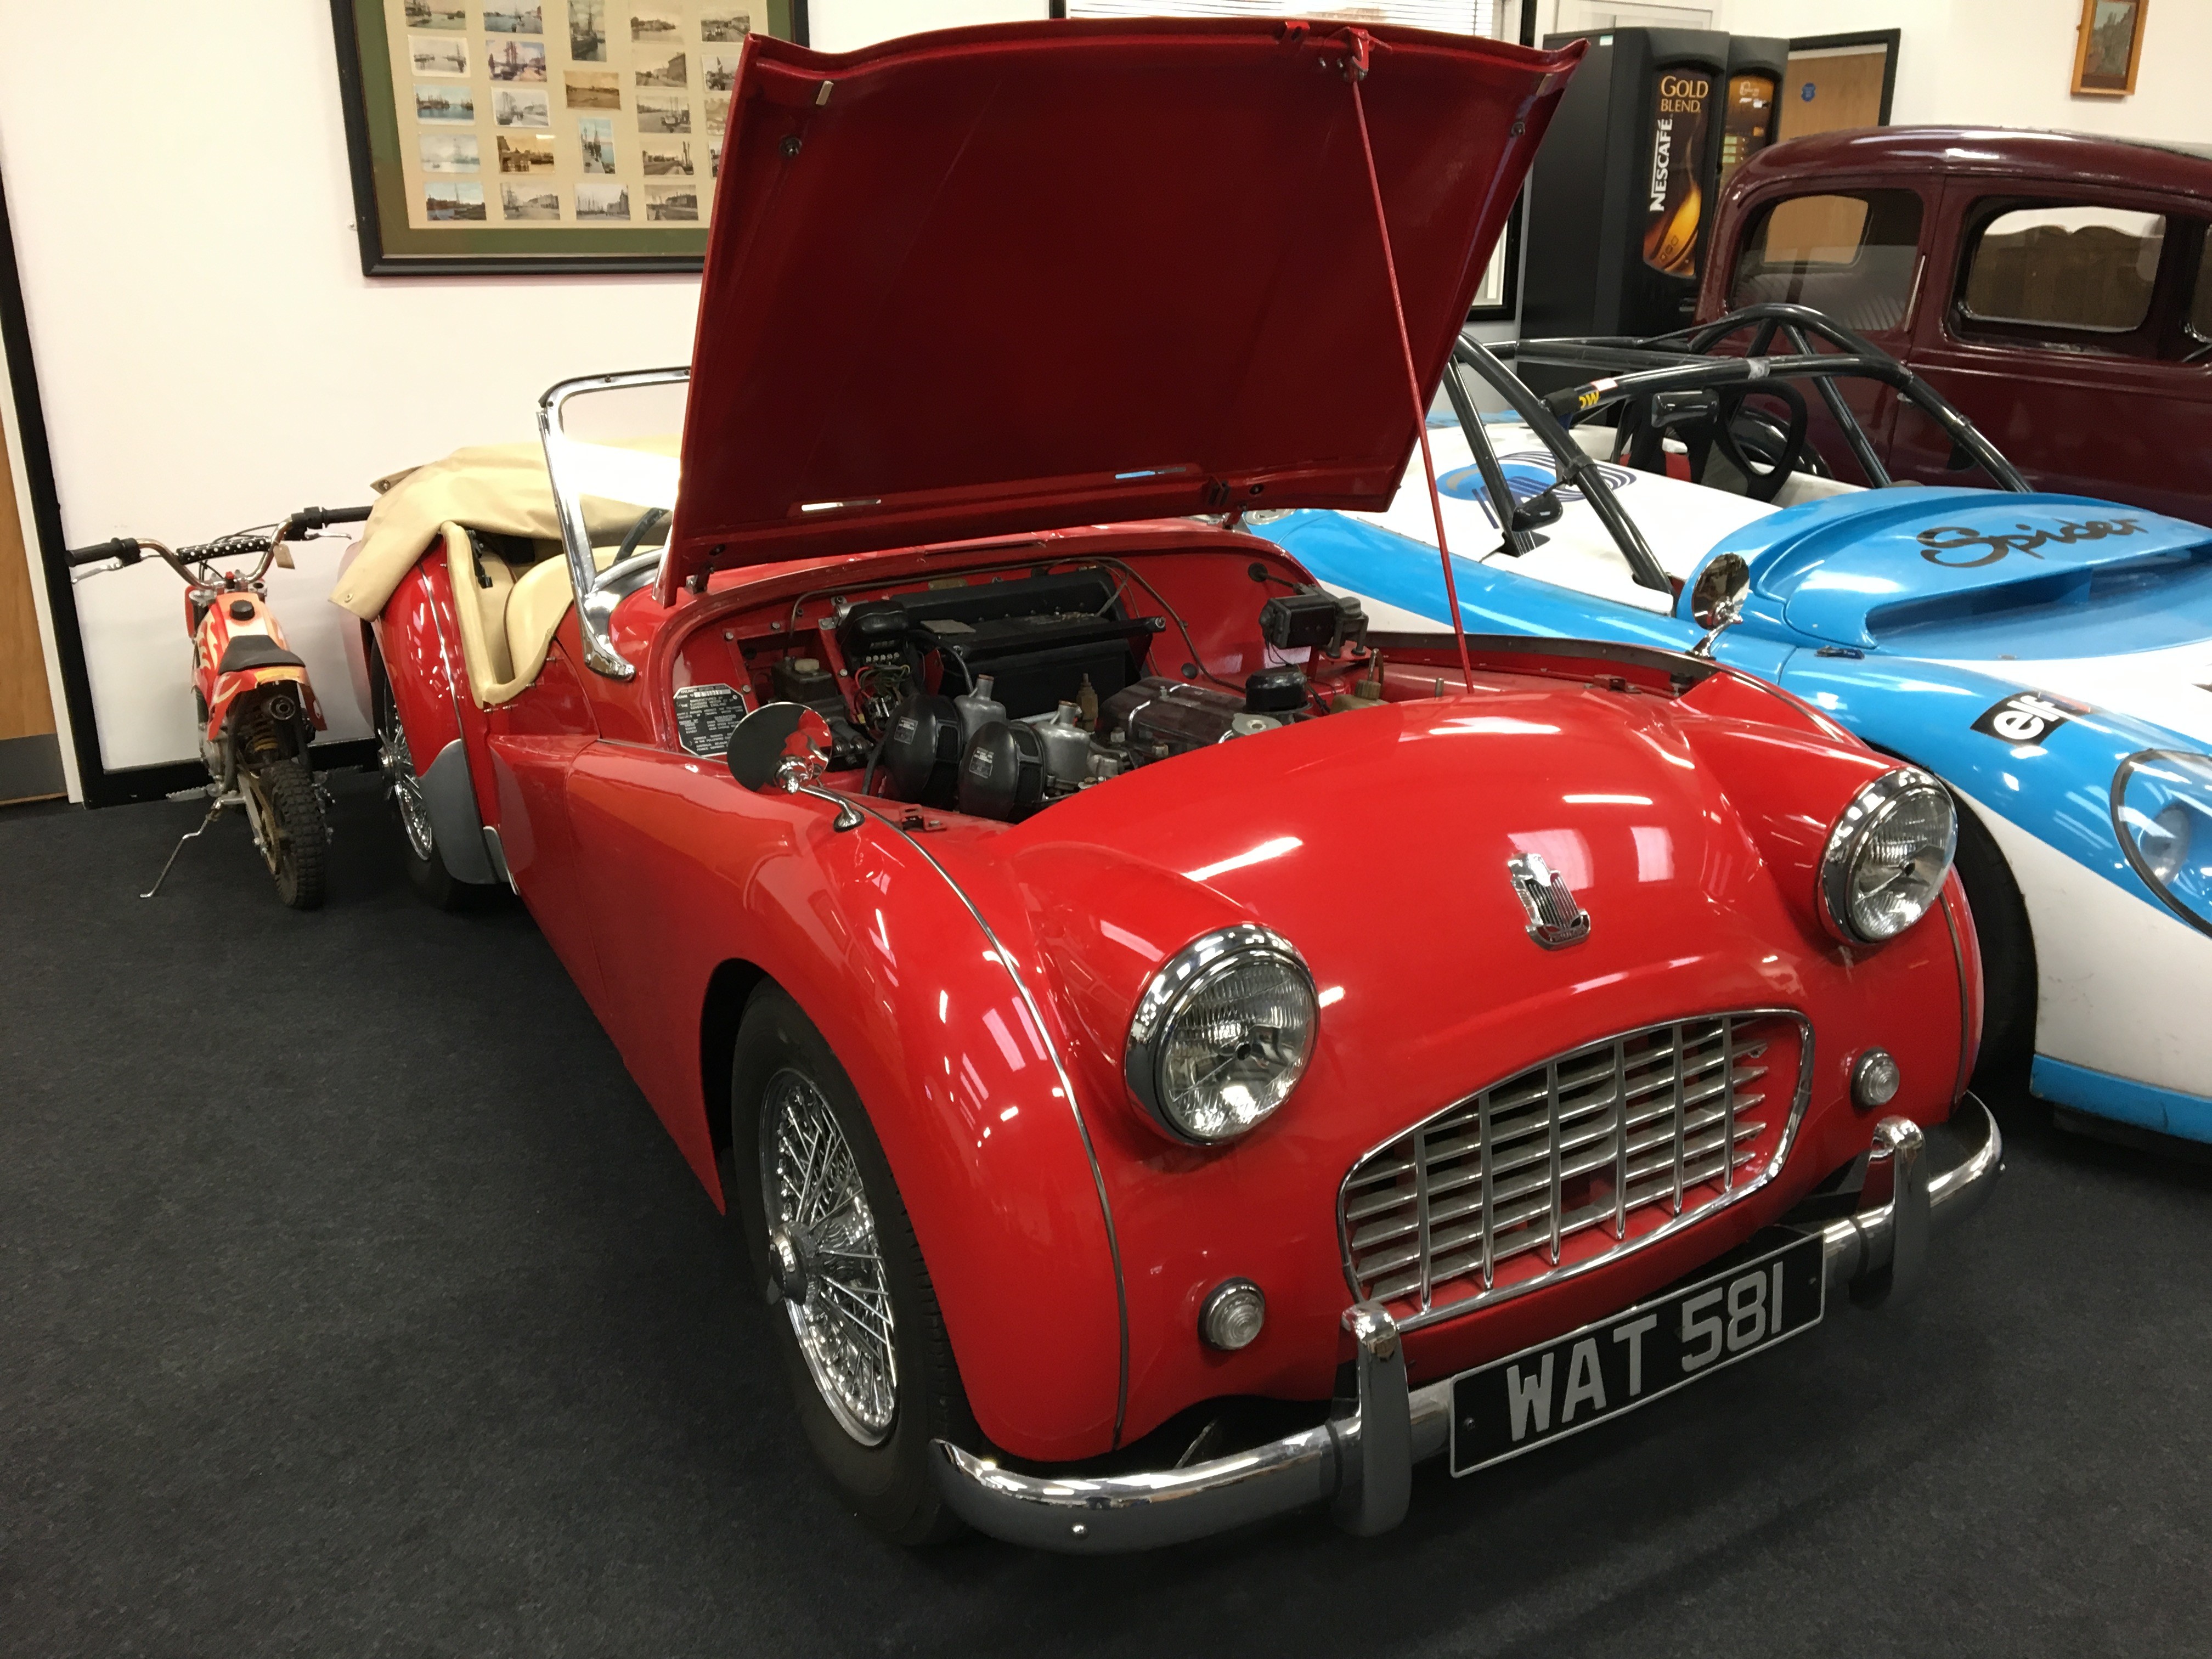 A Classic red Triumph TR3 First registered in 1957 and fitted with a 1991cc petrol engine.A historic